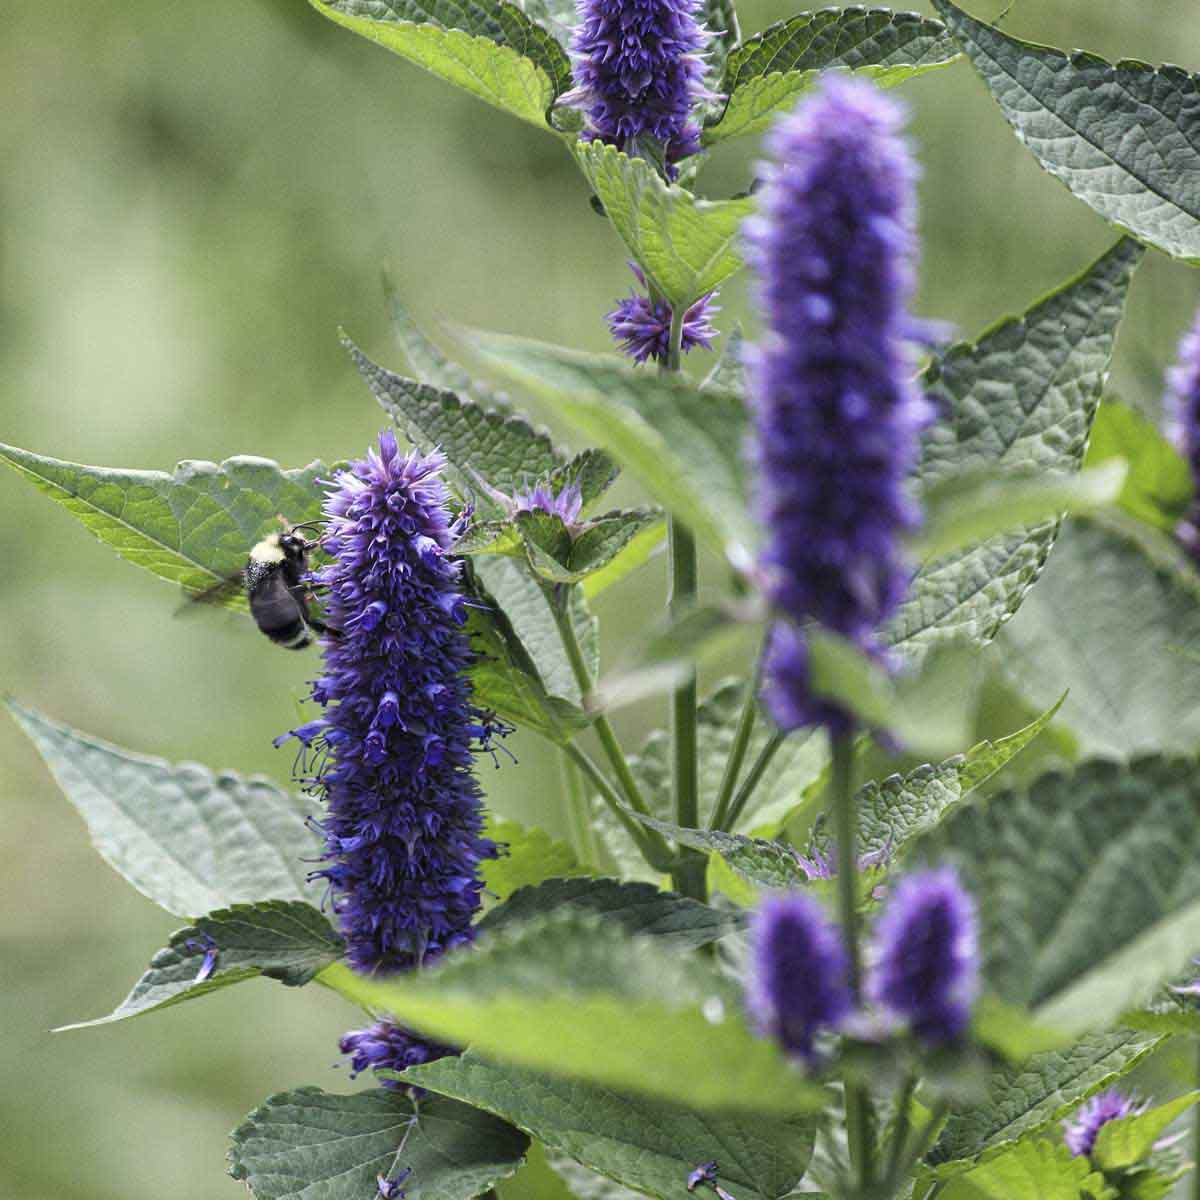 Bee approaches tall, purple anise hyssop flowers